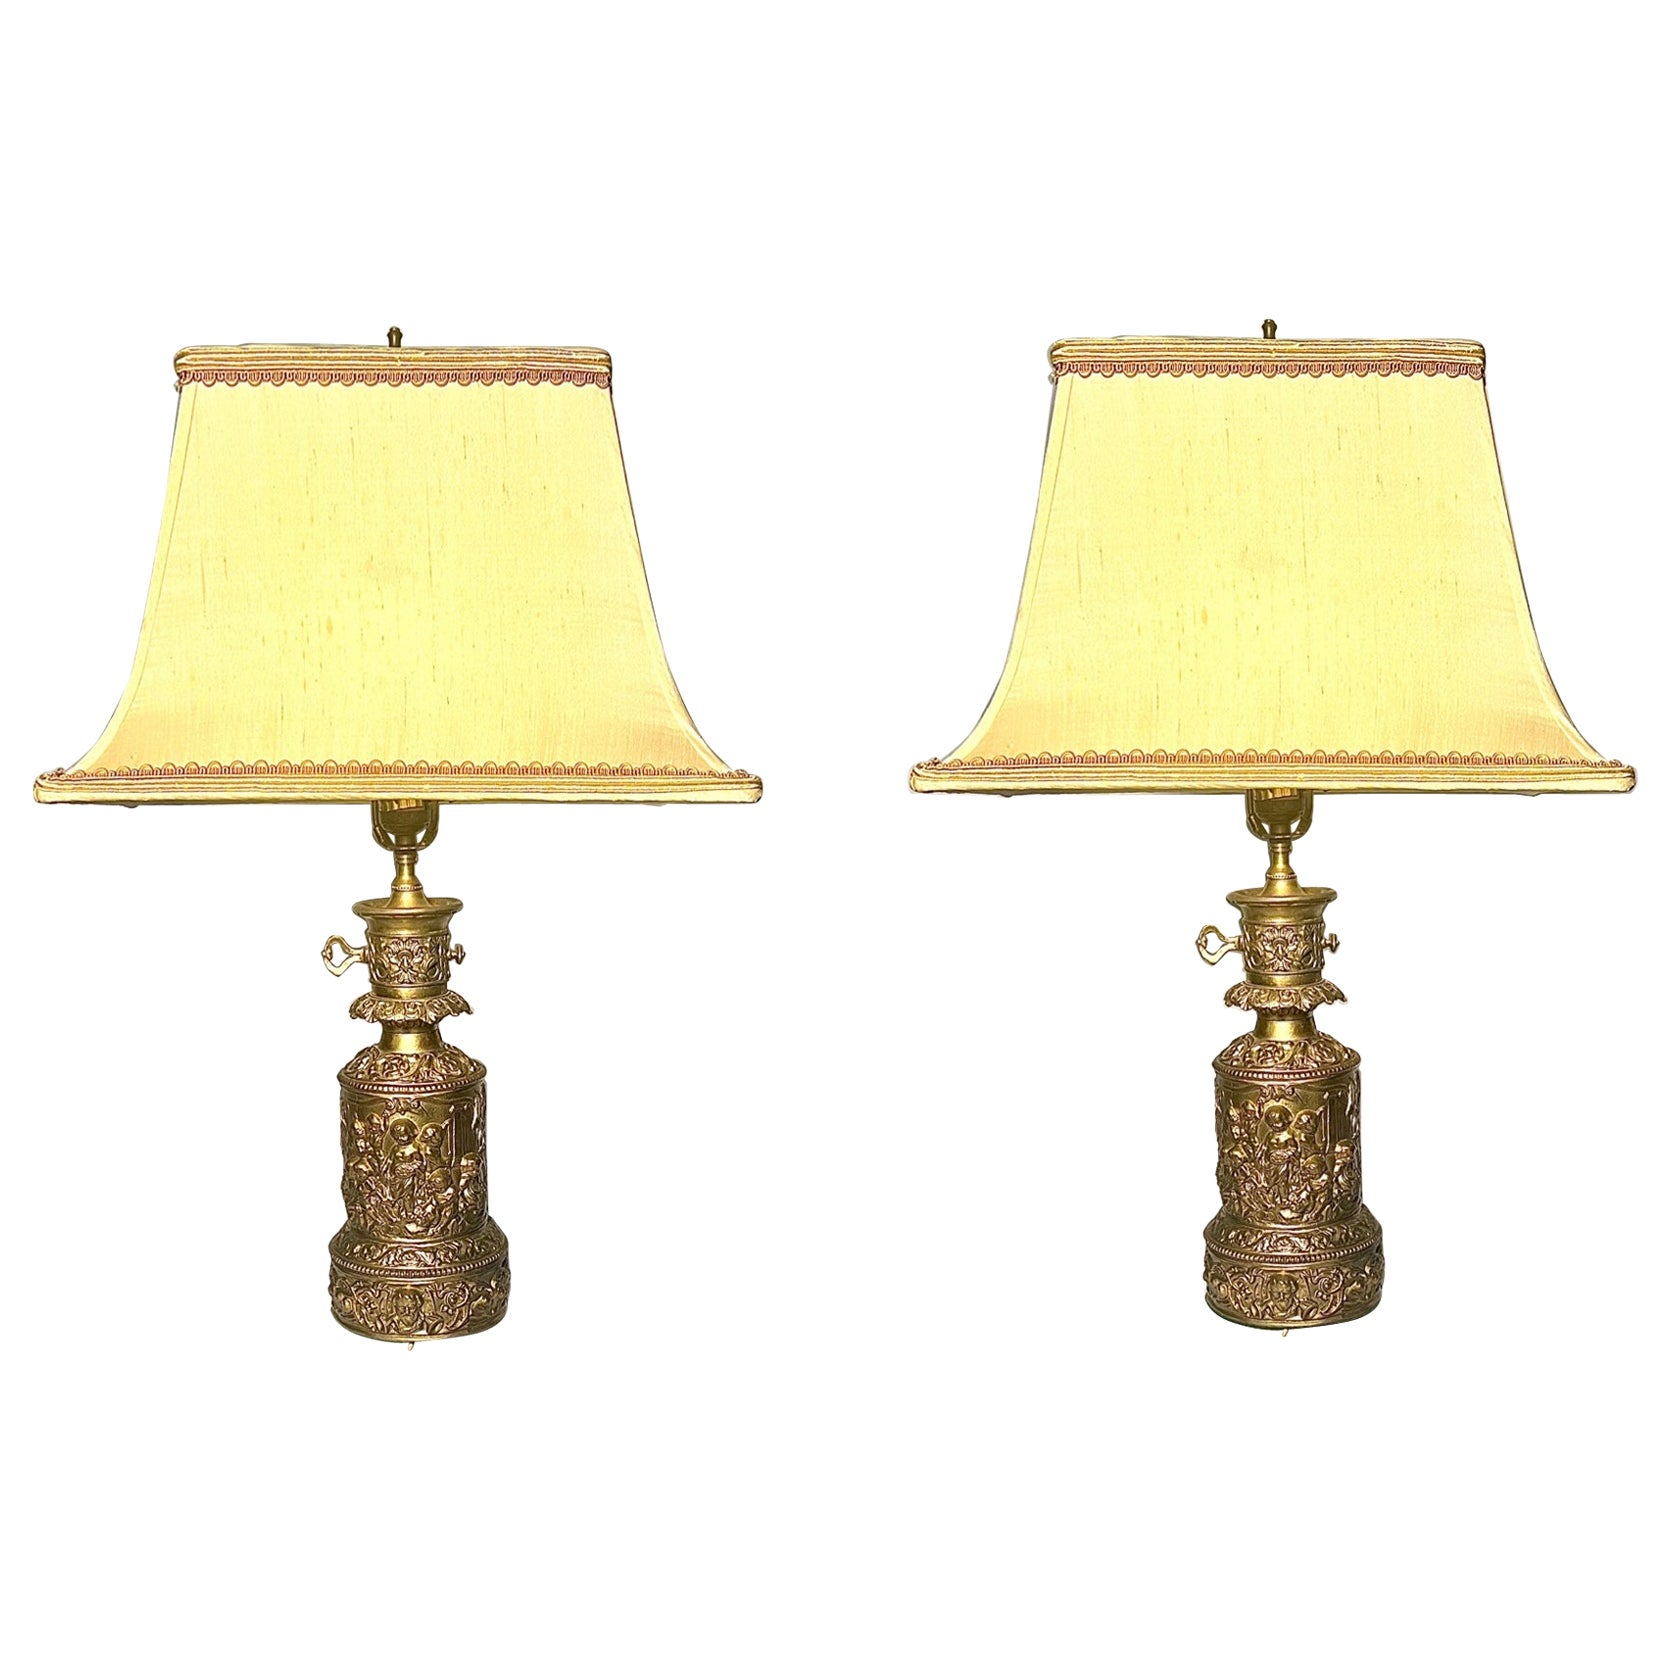 Pair of Antique French Parcel Gilt and Repousse Brass Oil Lamps, Circa 1830-1840 For Sale